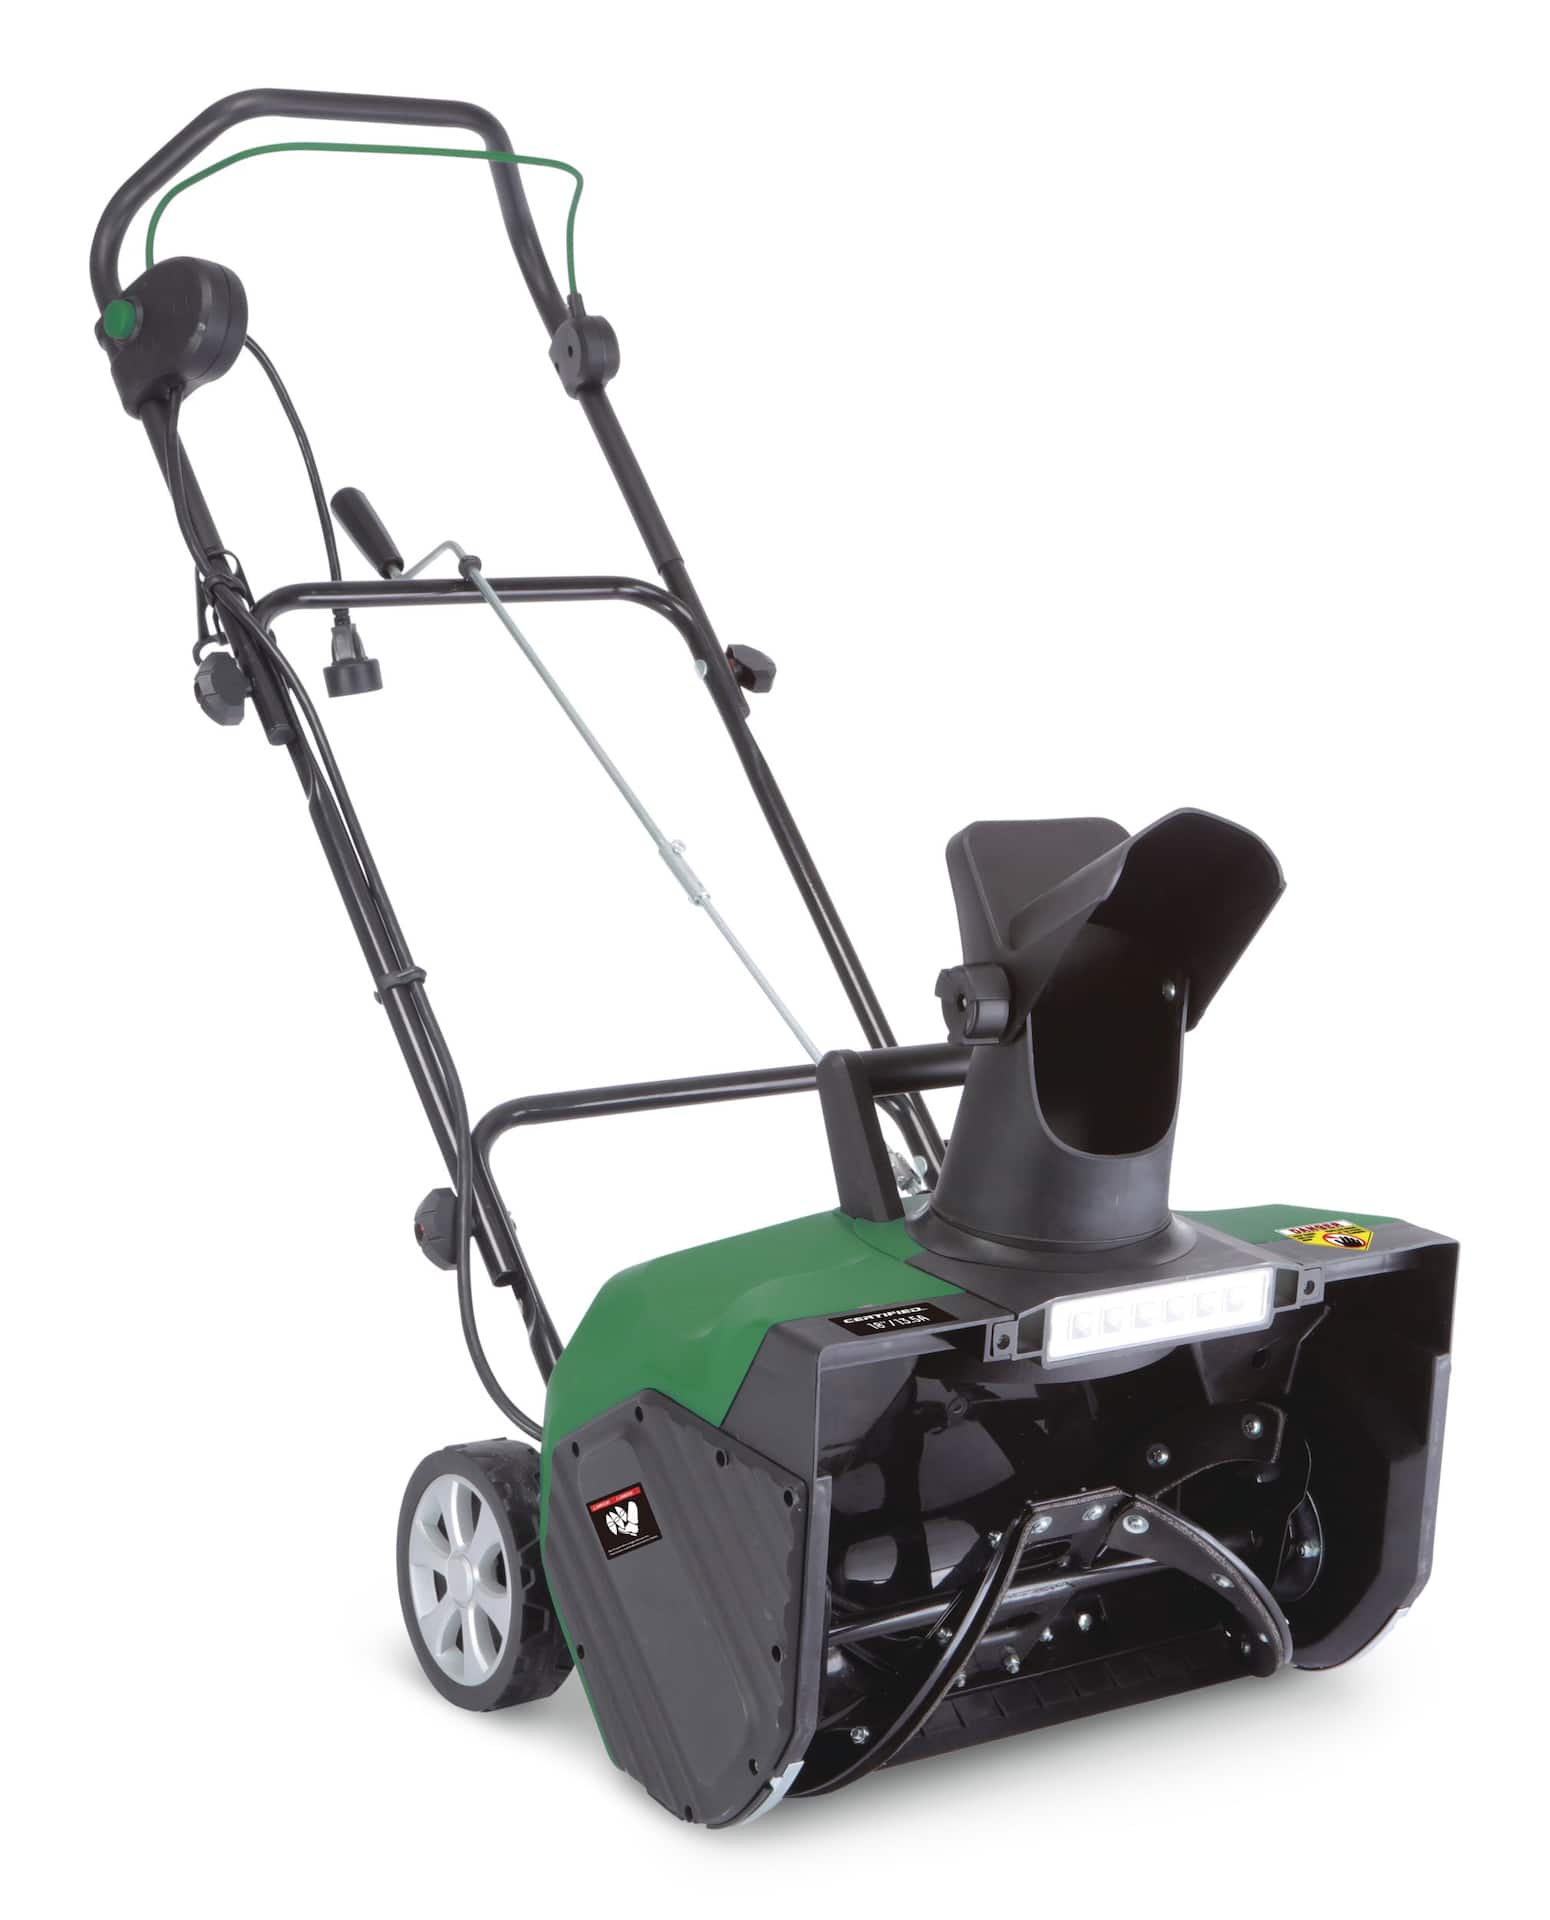 Certified 13.5-Amp Electric Corded Snowblower, 18-in Canadian Tire